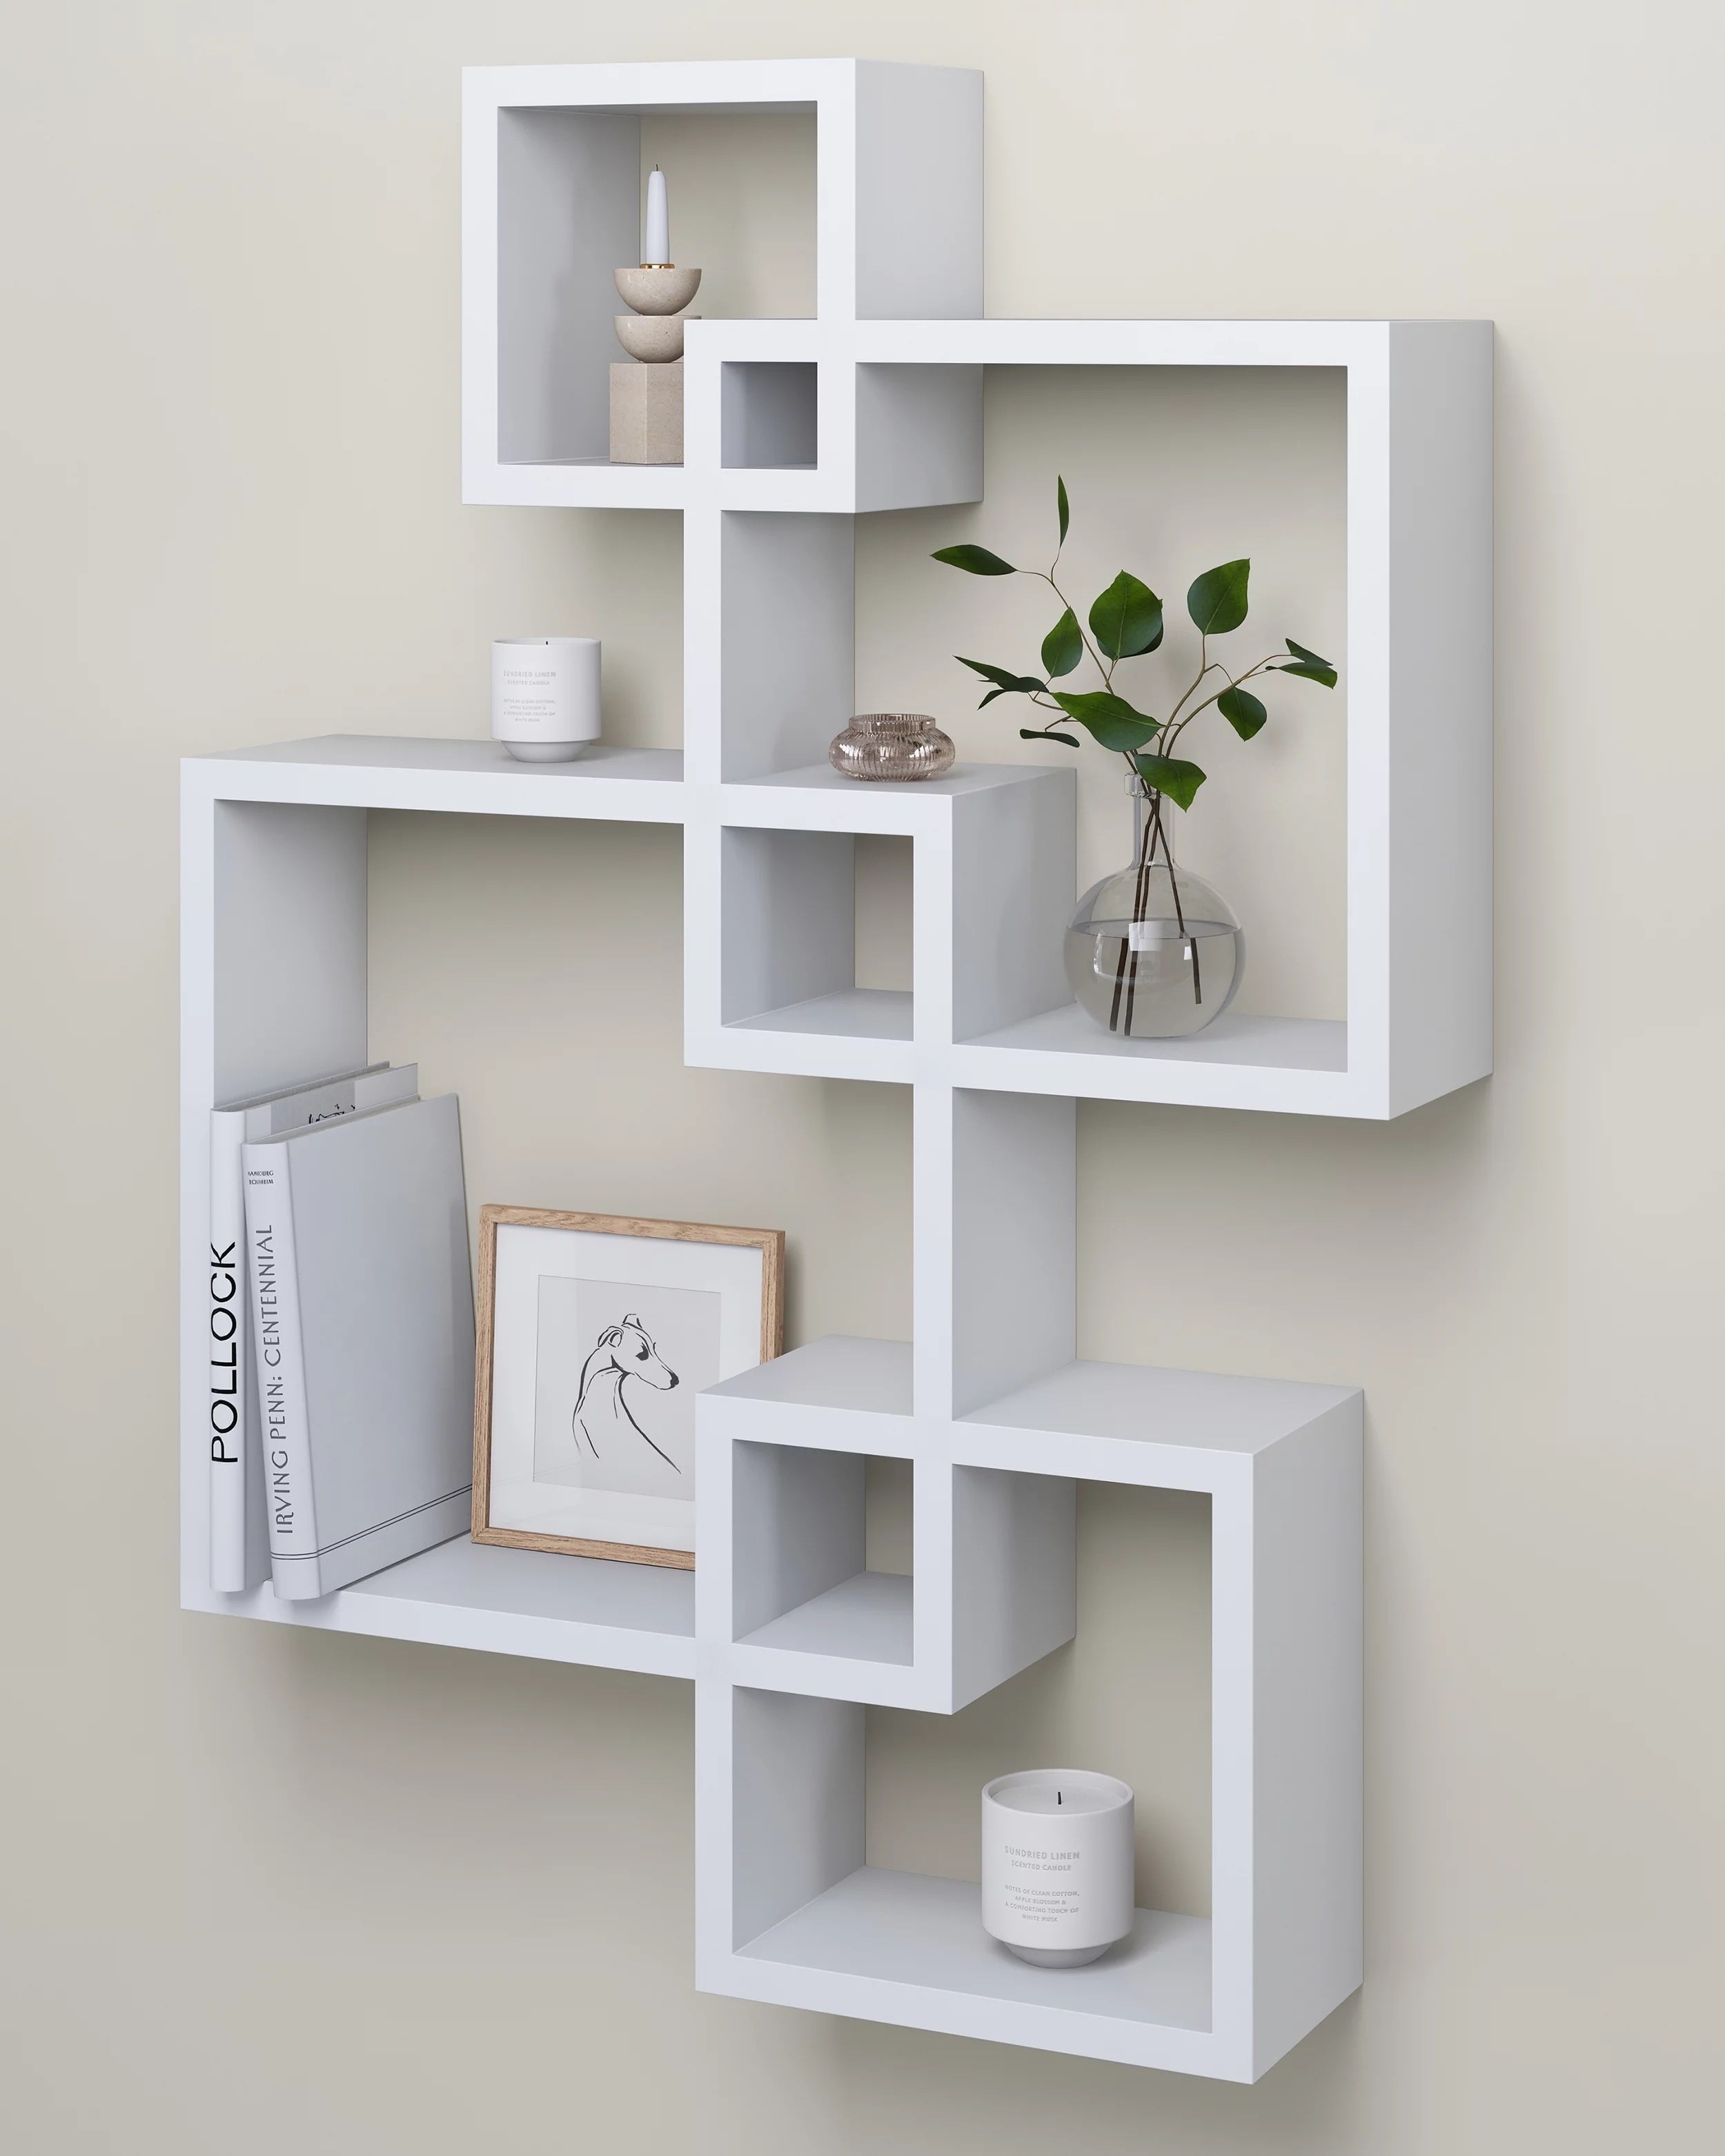 a white four-cube hanging shelf holding books, candles, and a plant